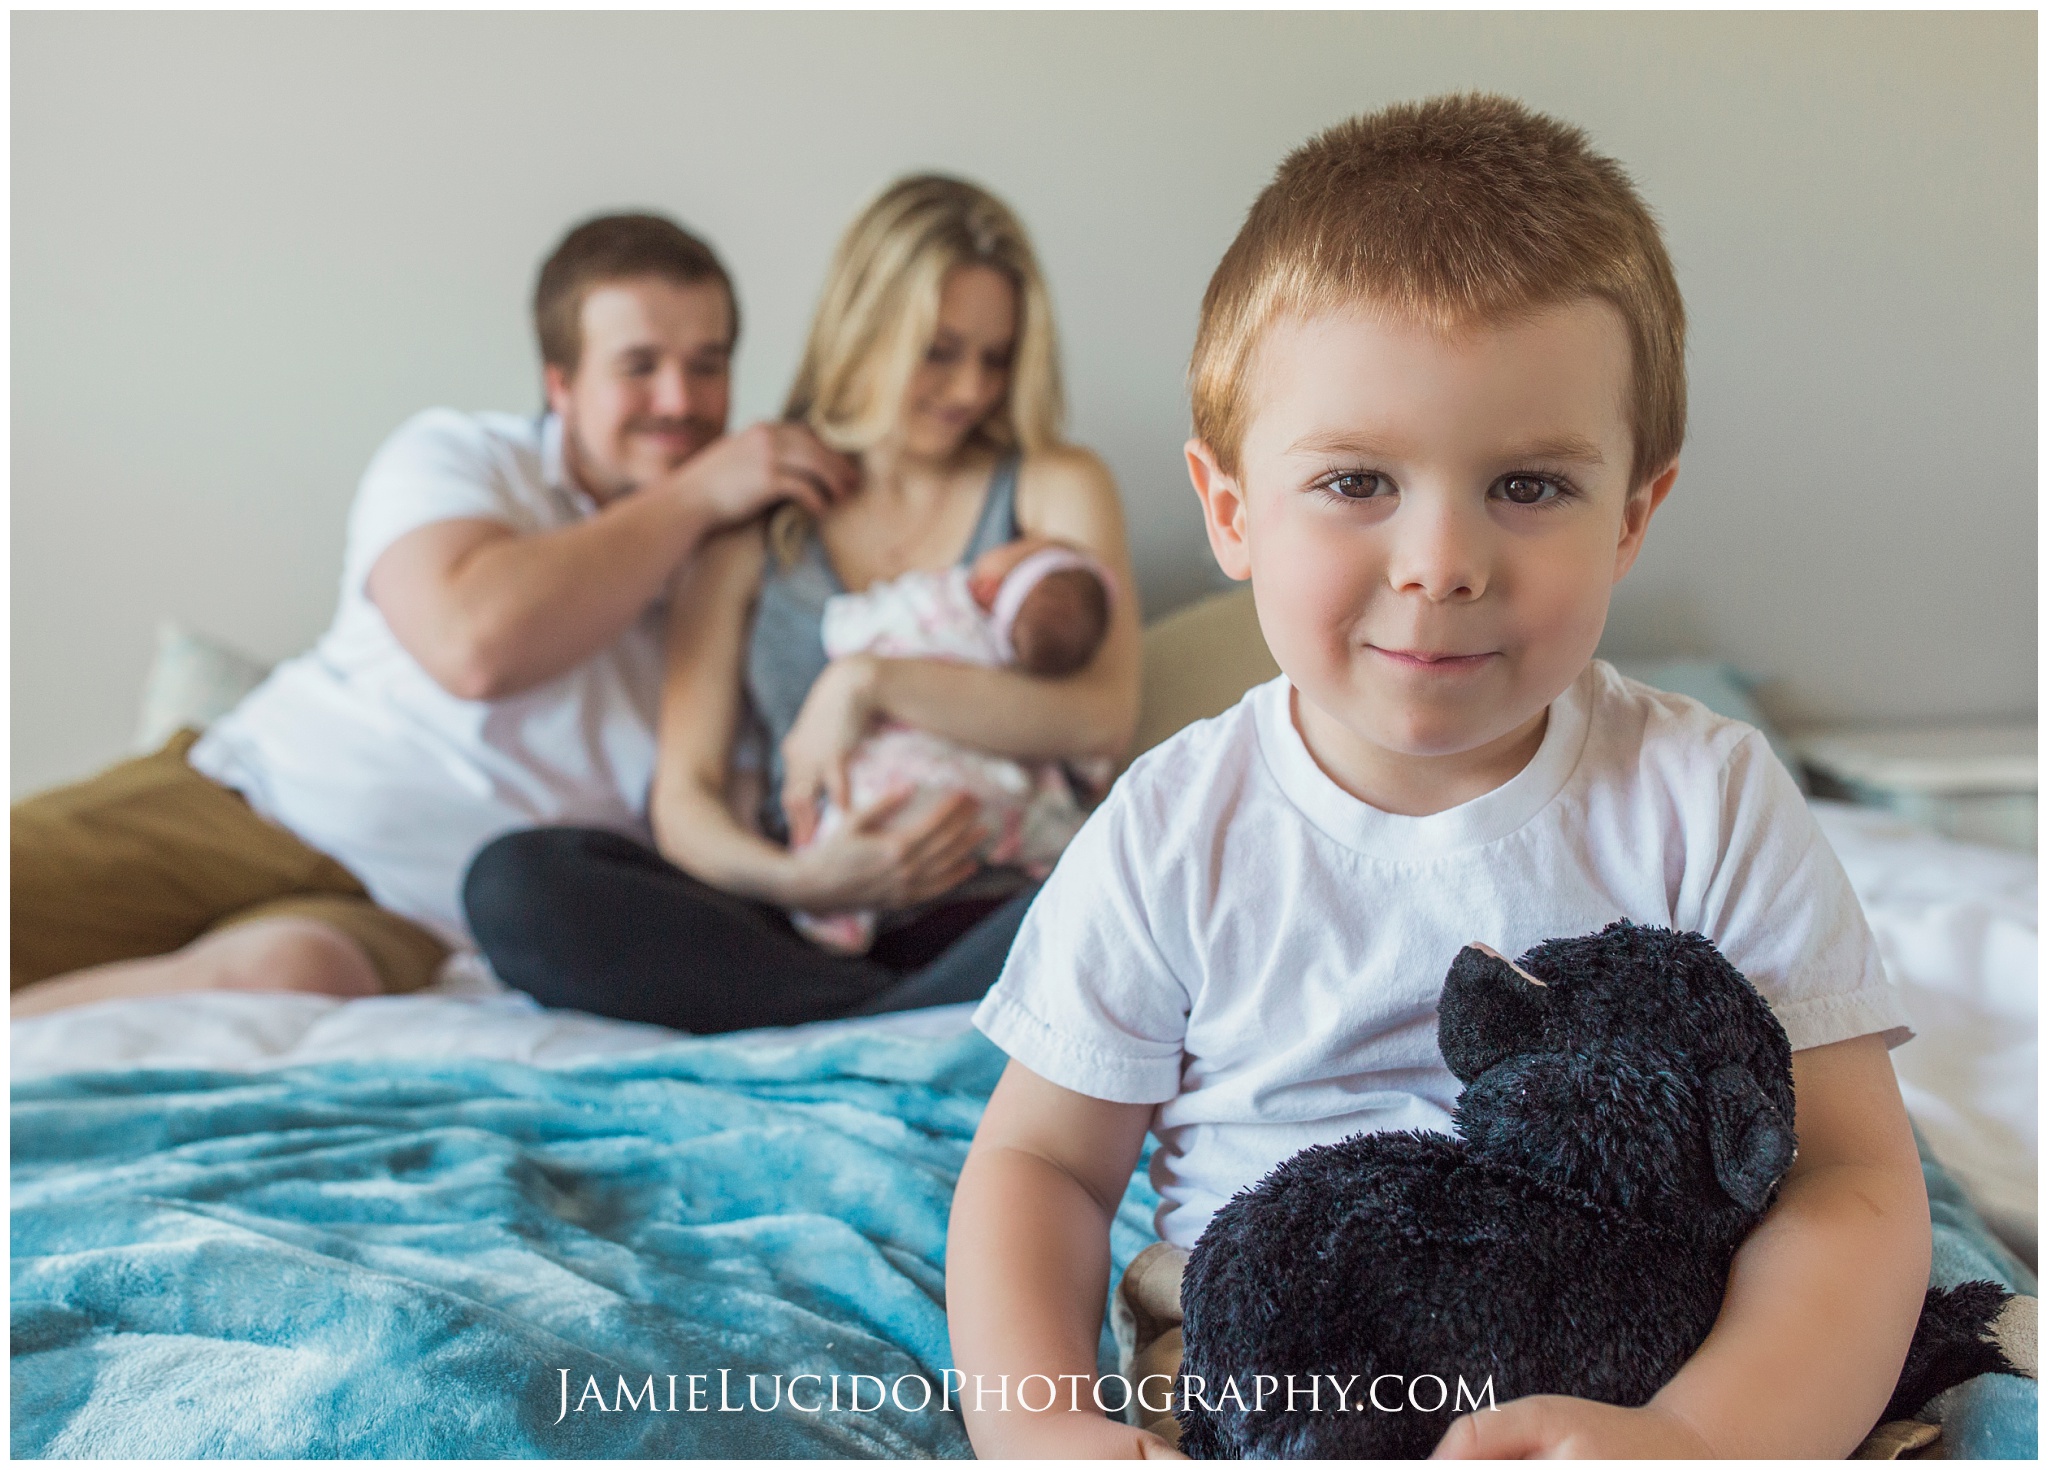 newborn photography, family photography, lifestyle session, at home session, welcome home photography